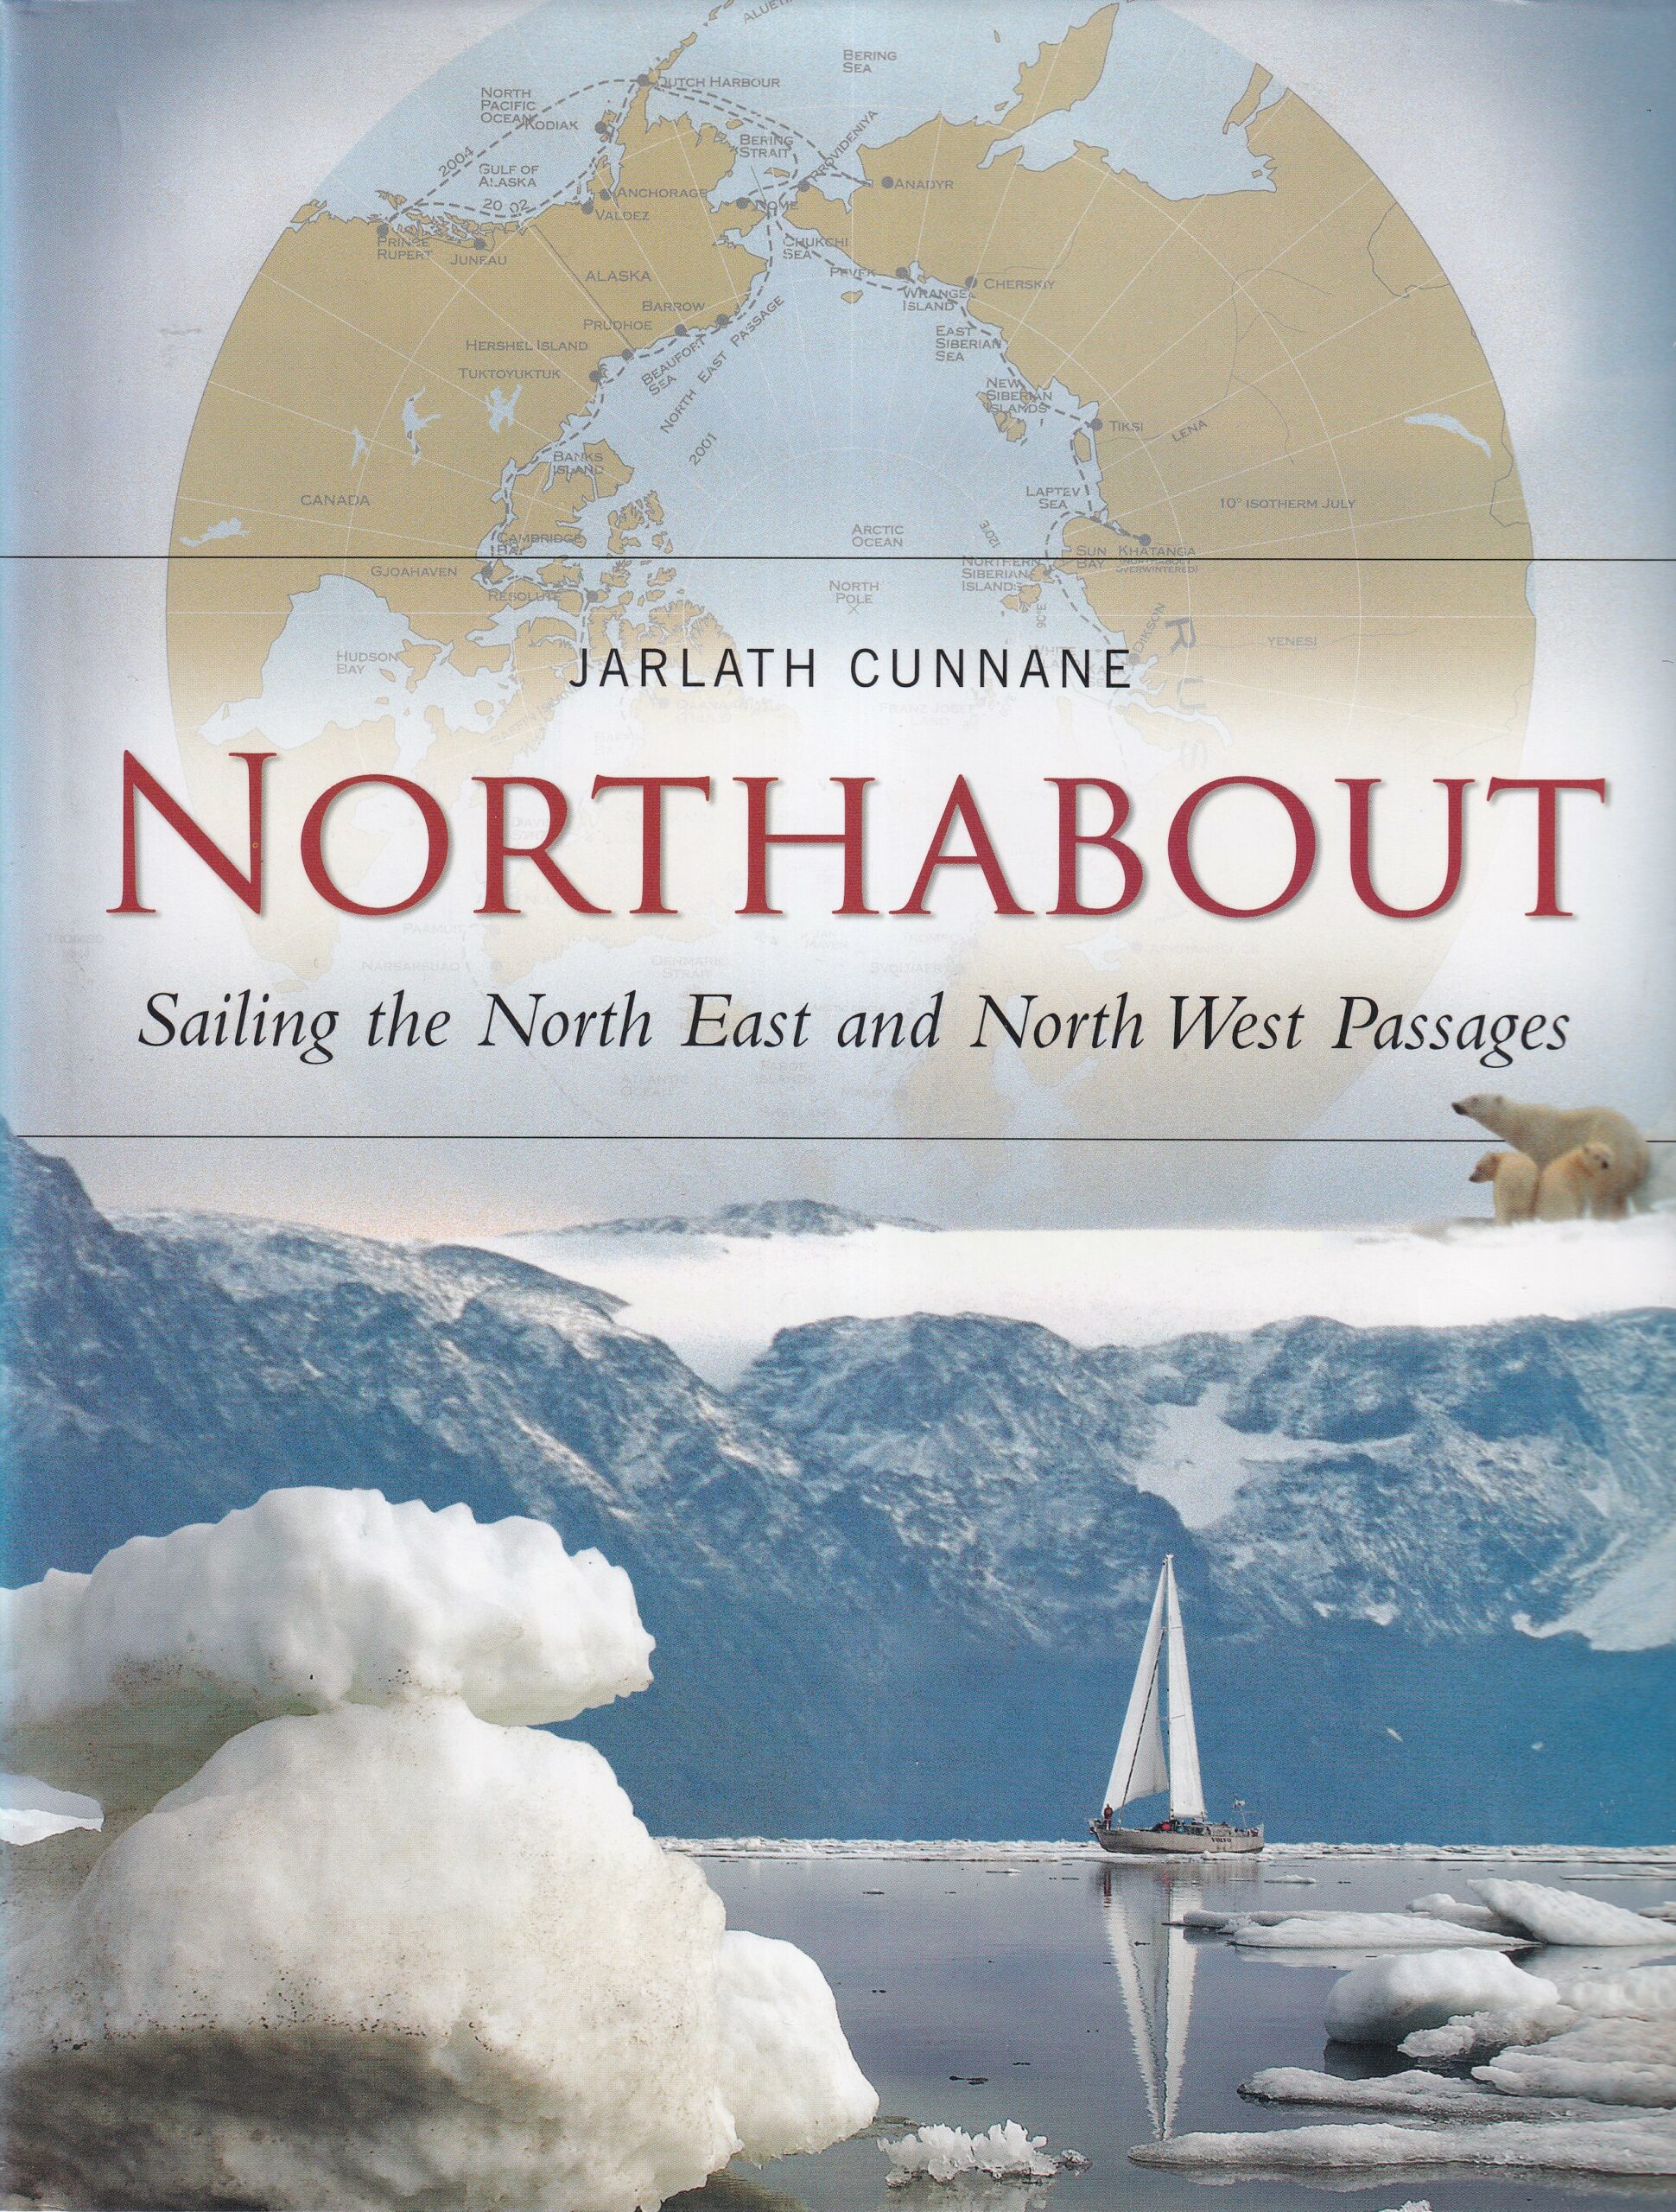 Northabout: Sailing the North East and North West Passages by Jarlath Cunnane